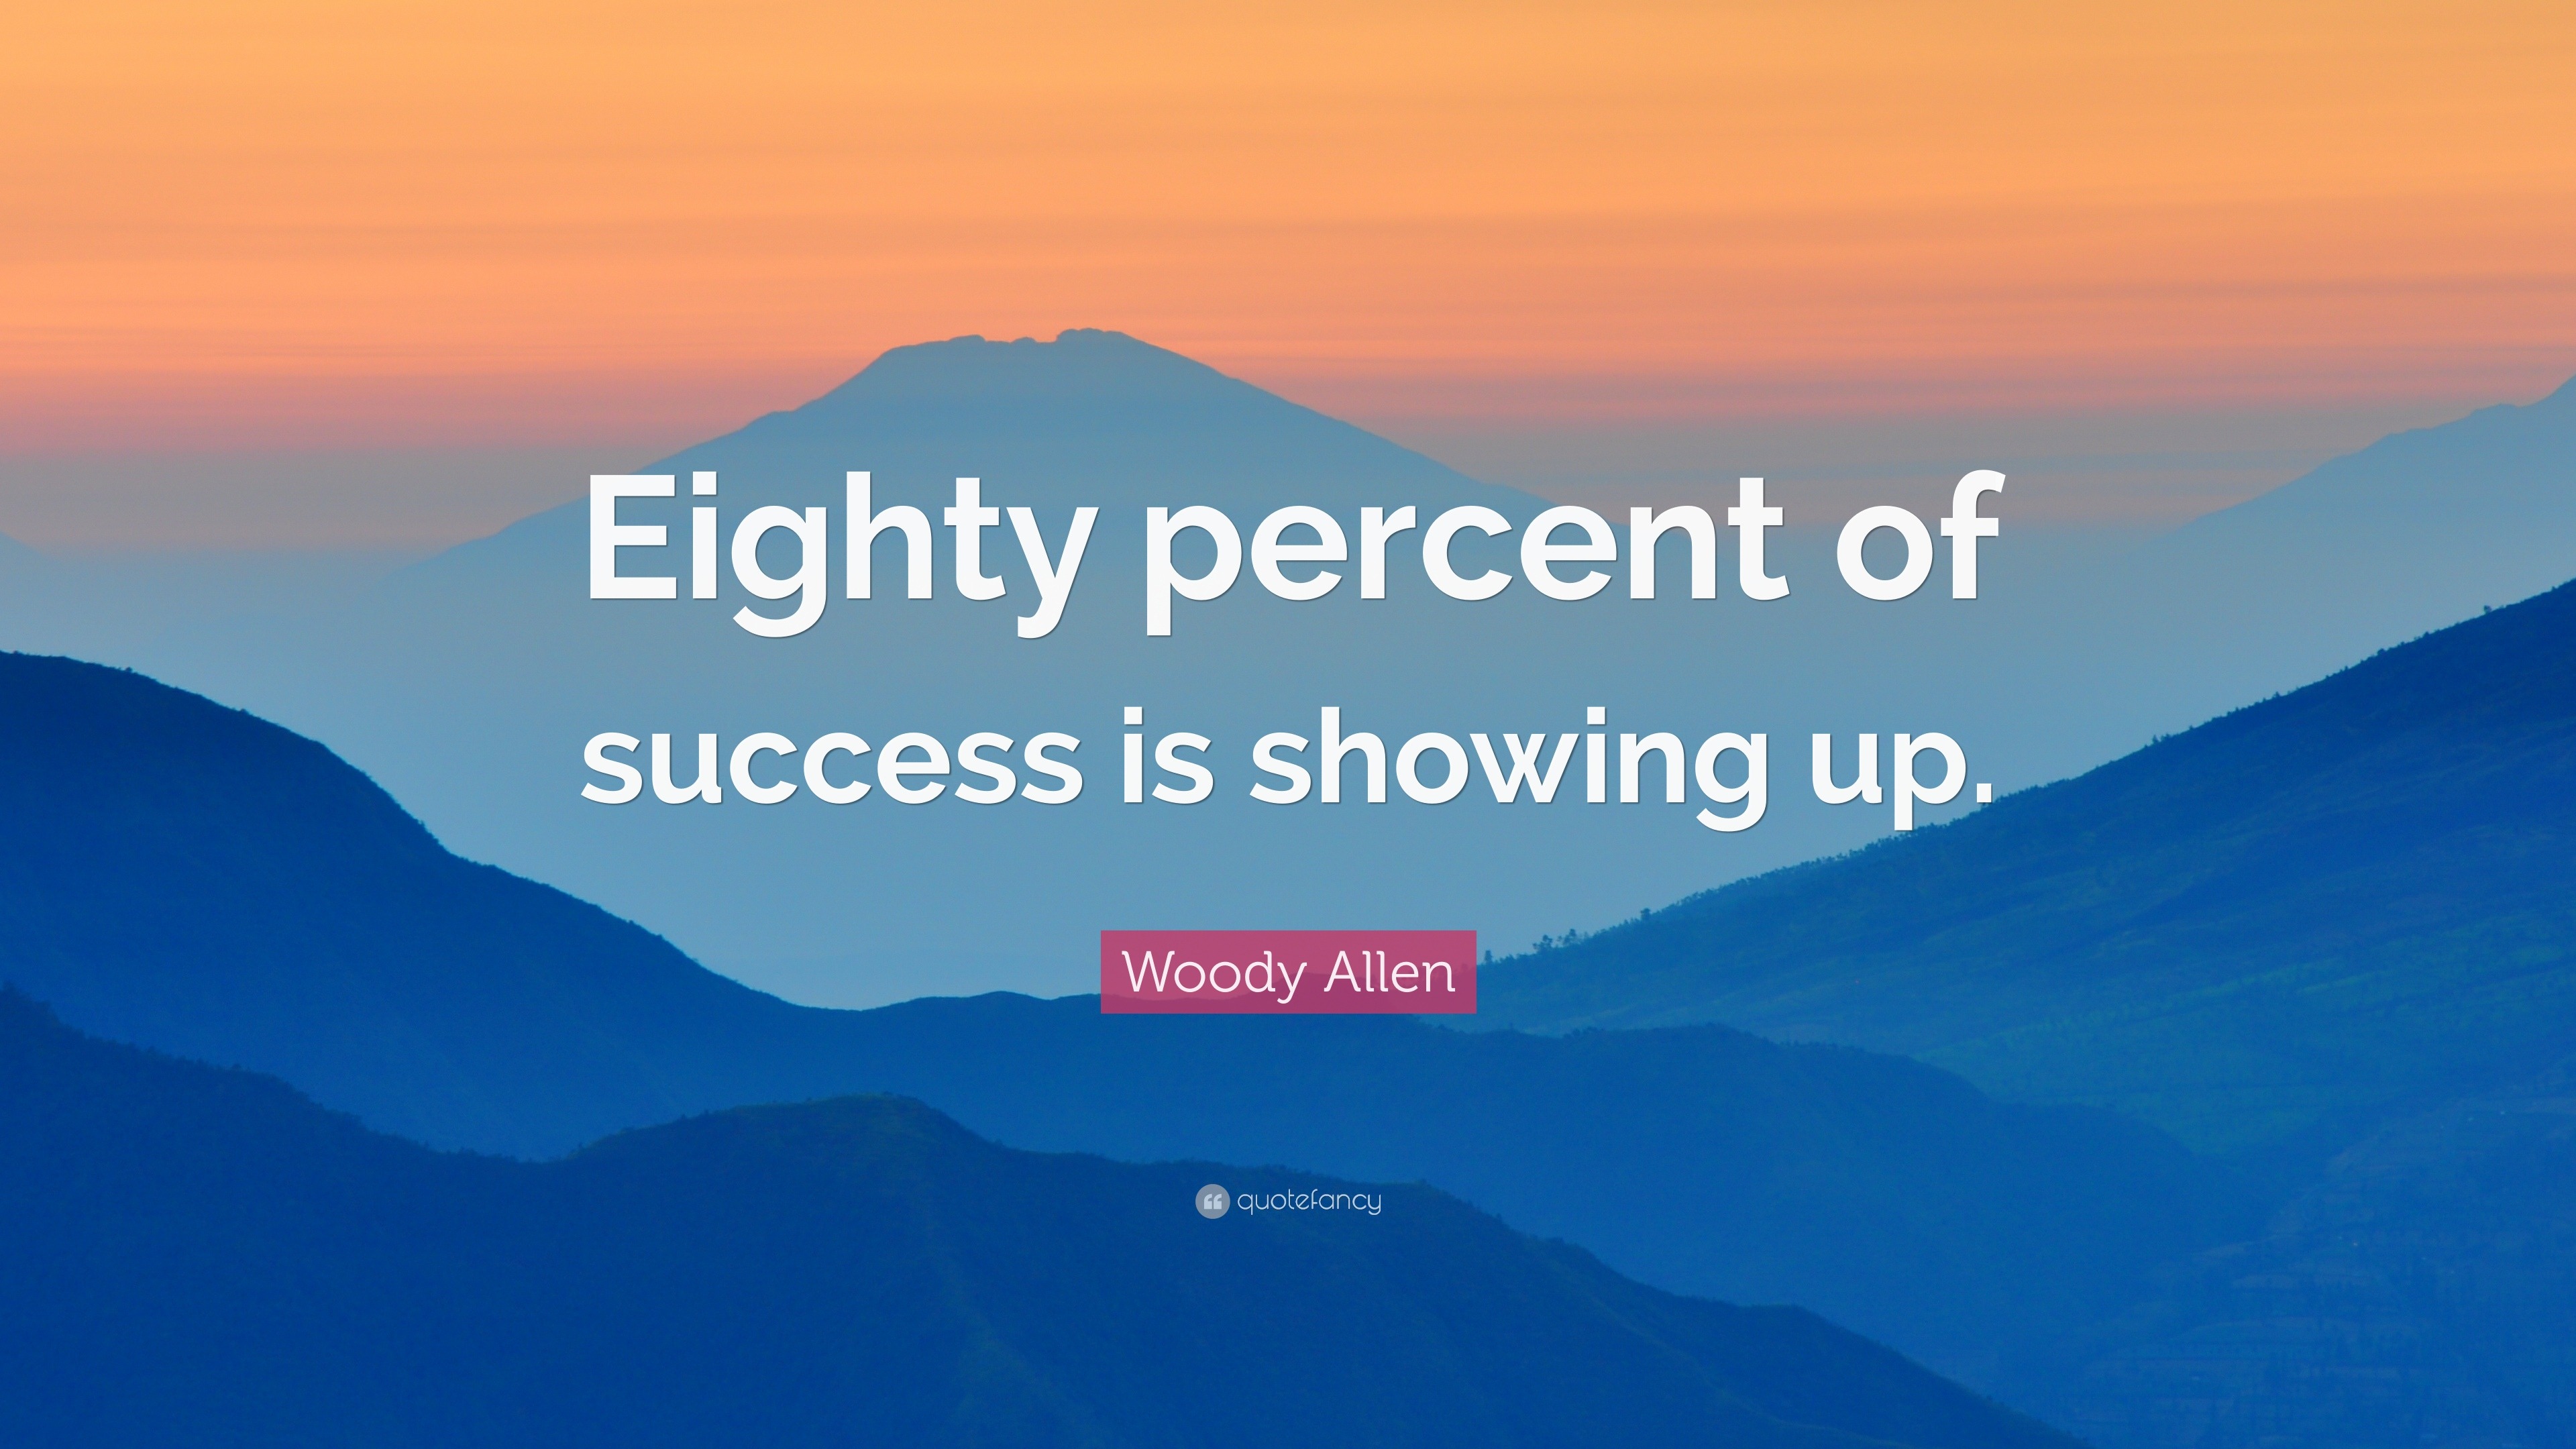 Woody Allen Quote “eighty Percent Of Success Is Showing Up” 8397